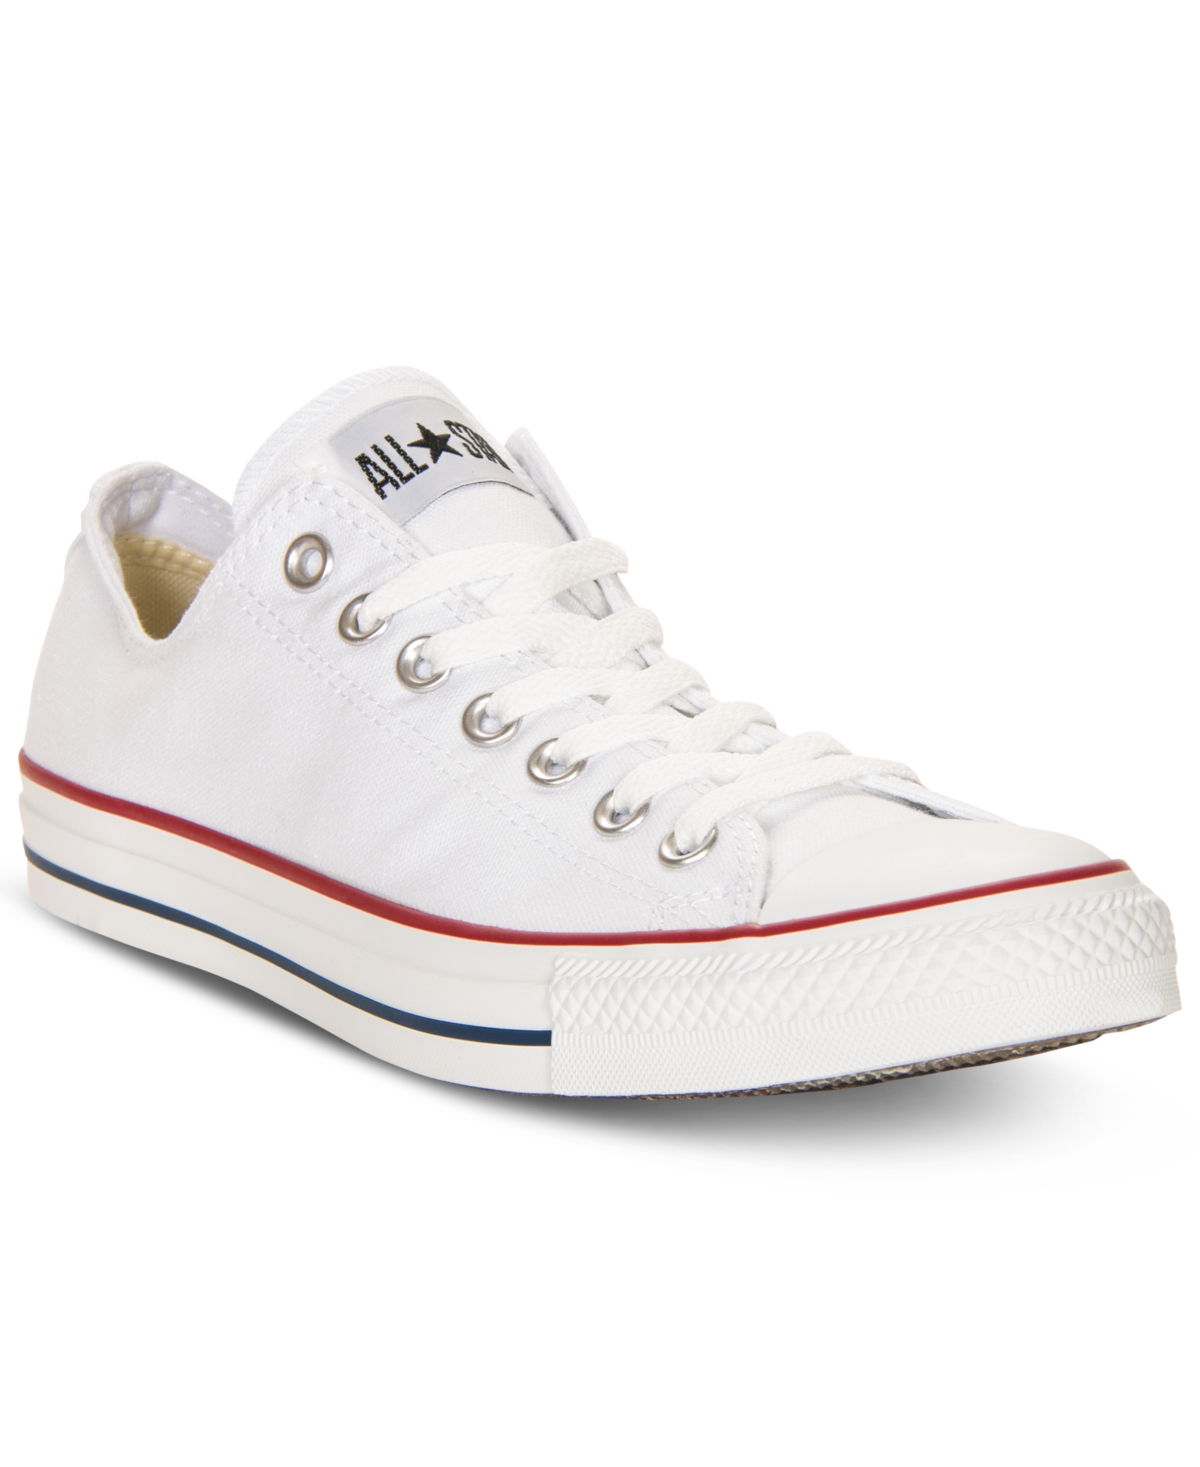 Men's Chuck Taylor Low Top Sneakers from Finish Line - Black, White